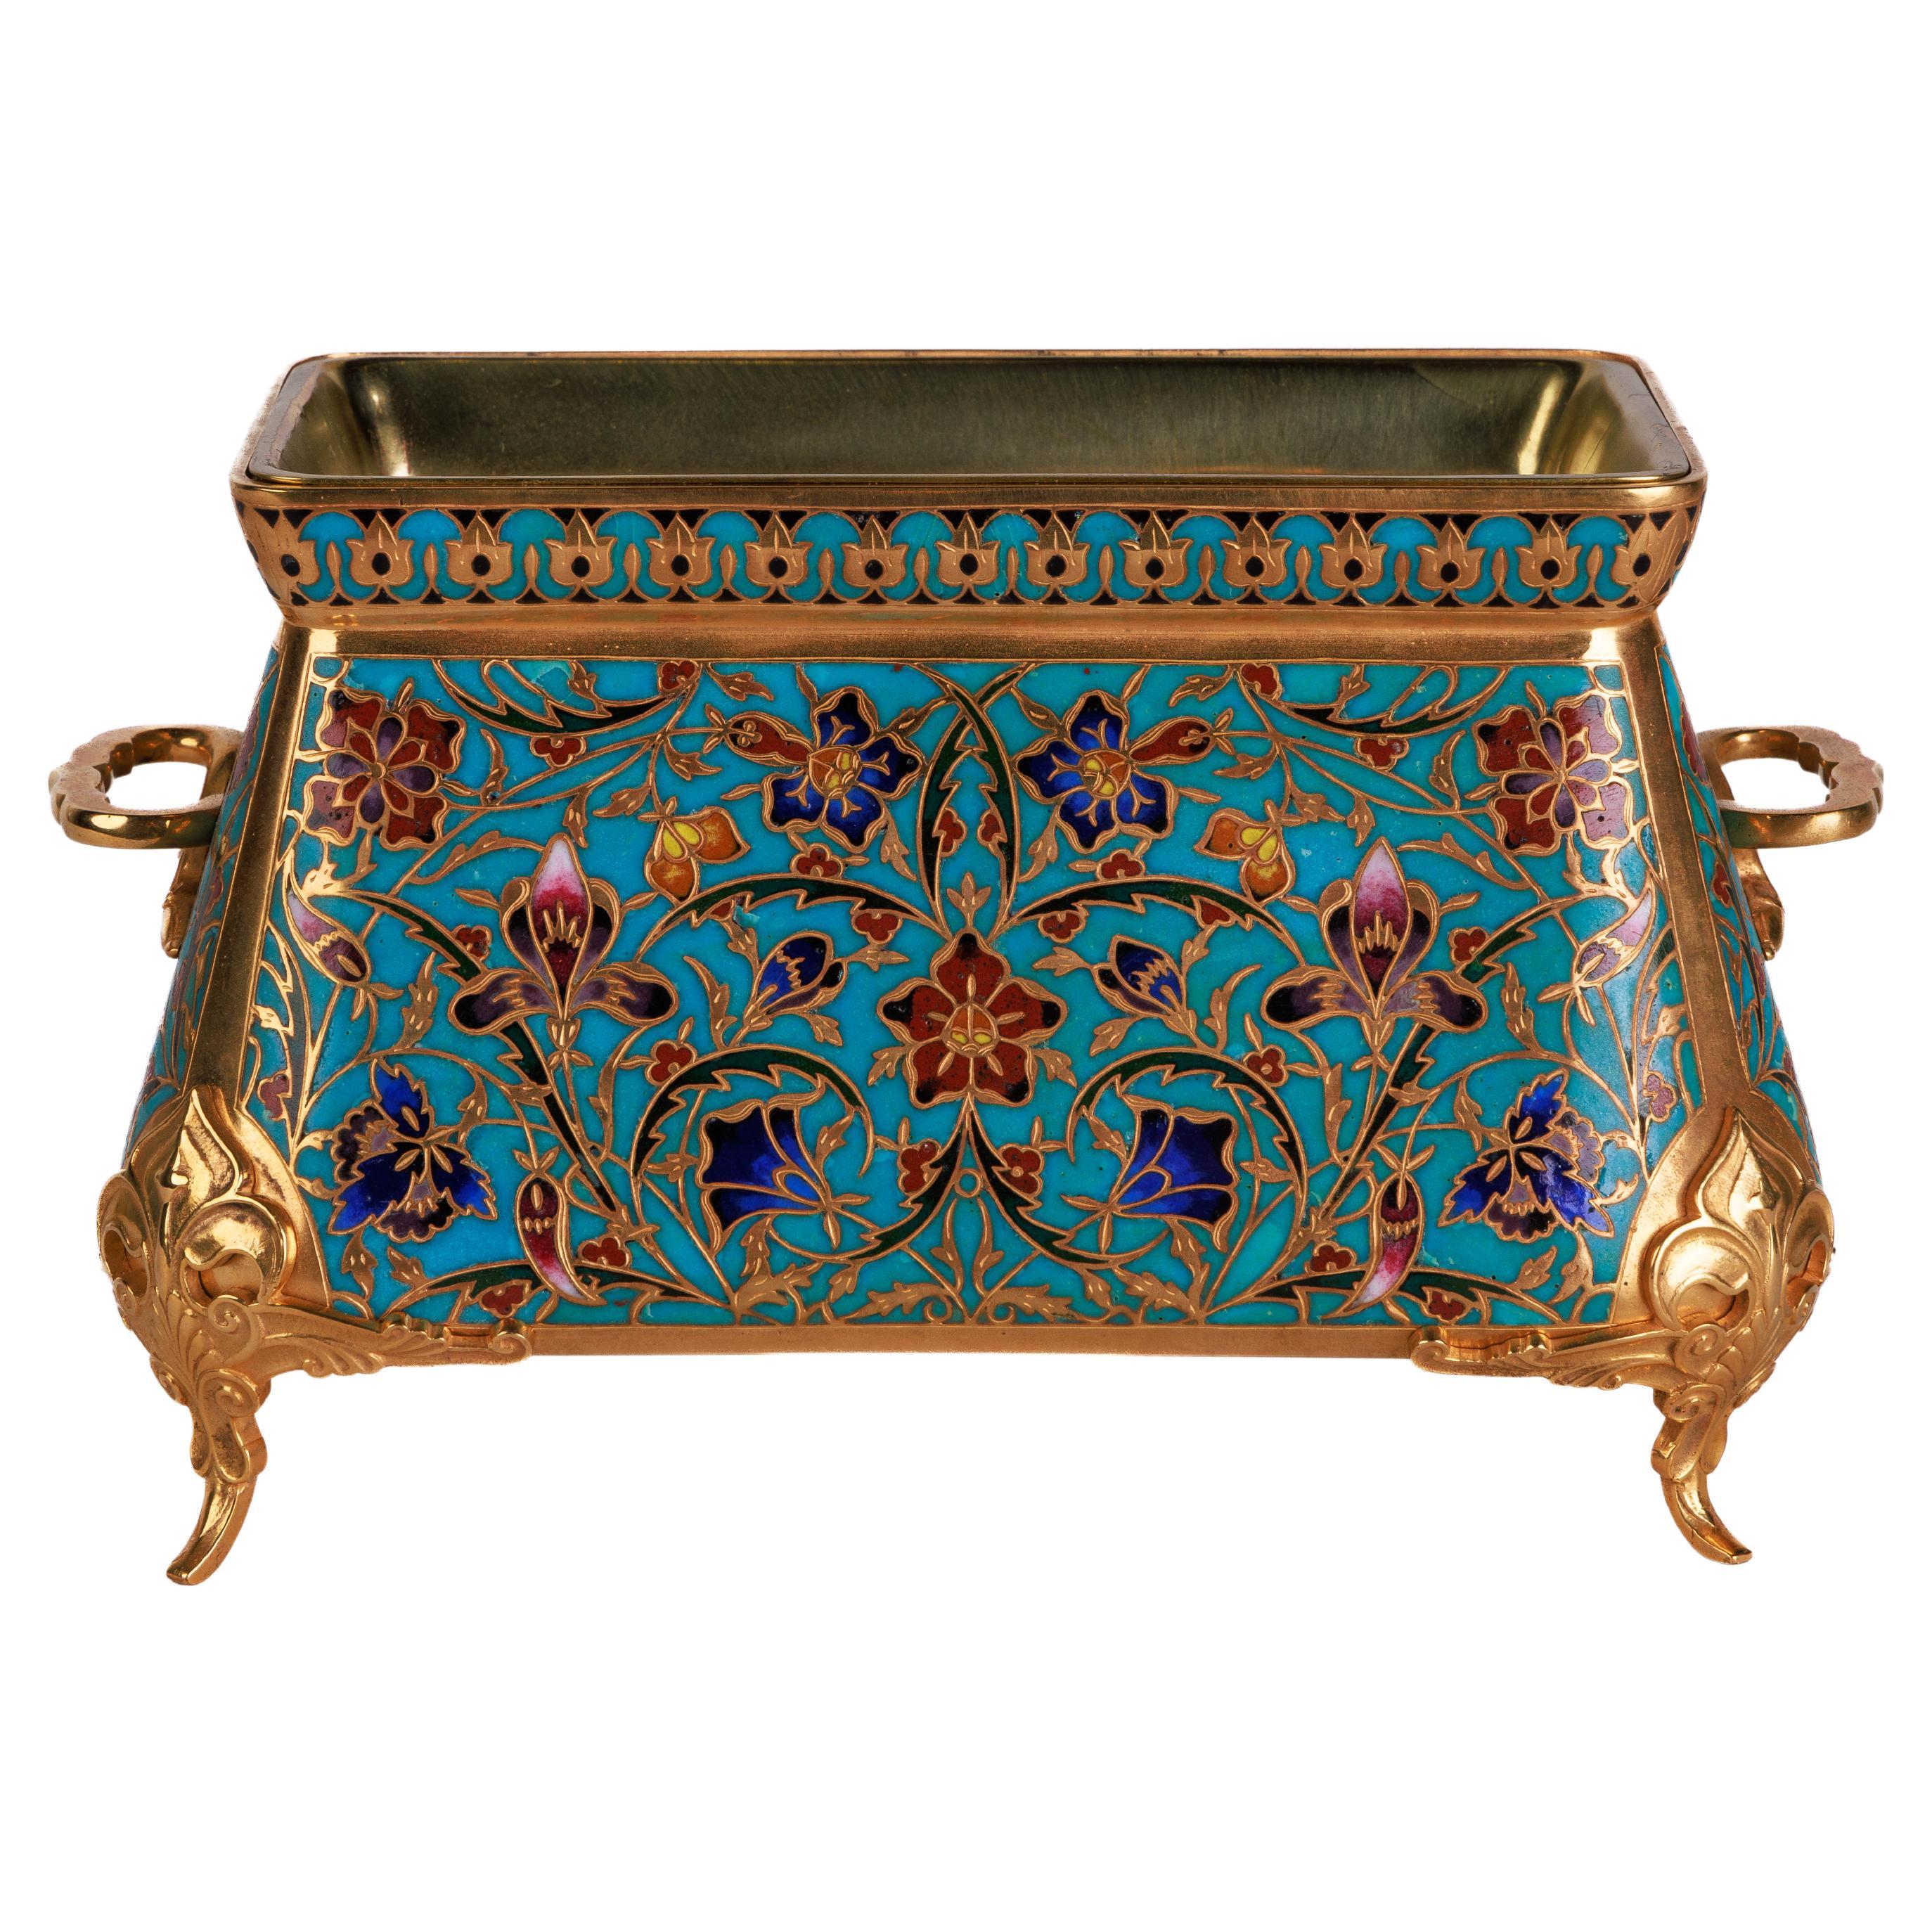 Ferdinand Barbedienne, A French Ormolu and Champleve Enamel Jardiniere, C. 1870, The Design Attributed to Louis Constant Sevin.

An exceptional quality turquoise-ground champlevé enamel and gilt-bronze ormolu jardinière decorated all over with